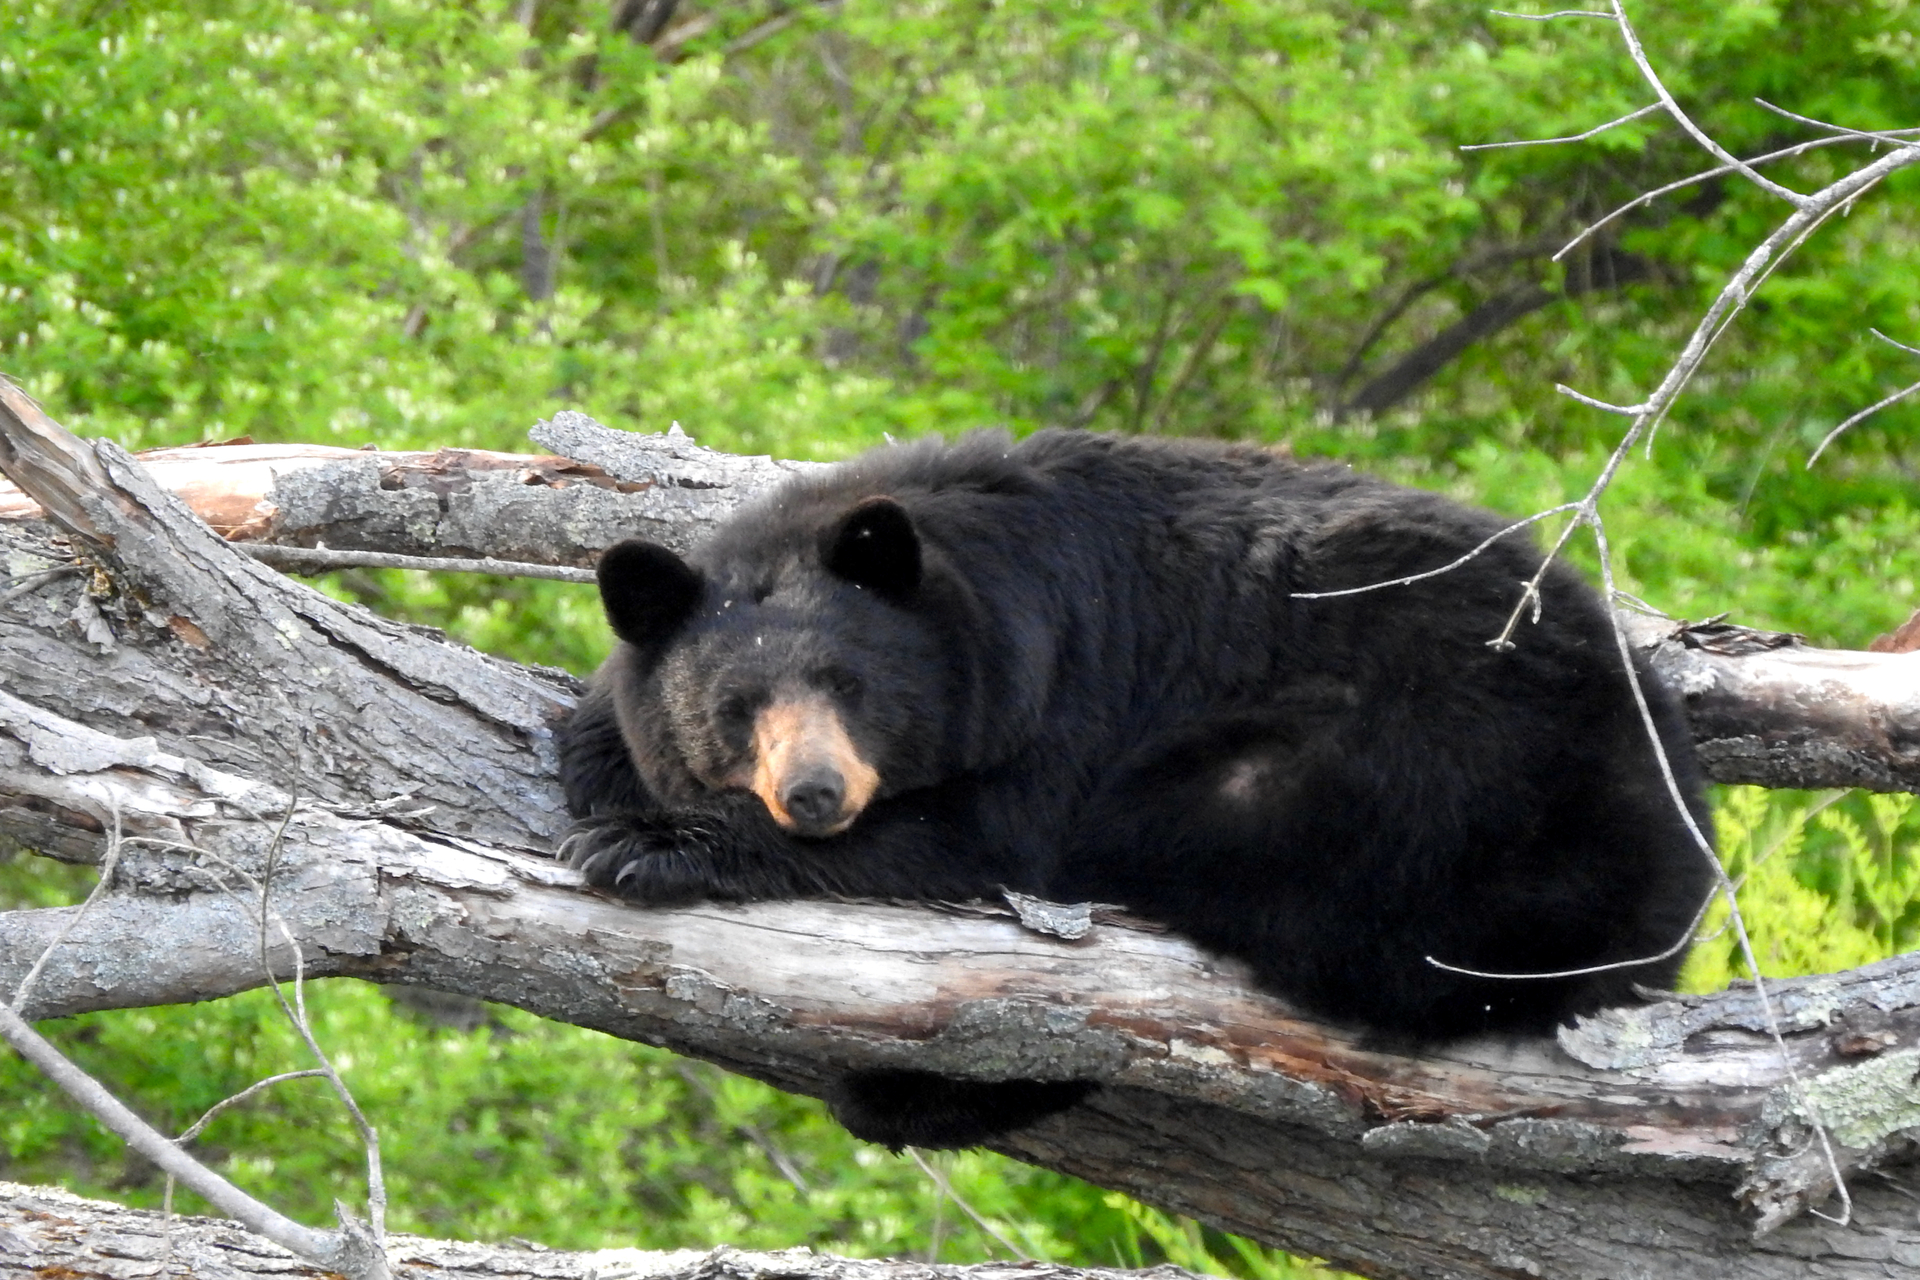 A black bear laying on branches in a tree, with its head resting in its front paws.